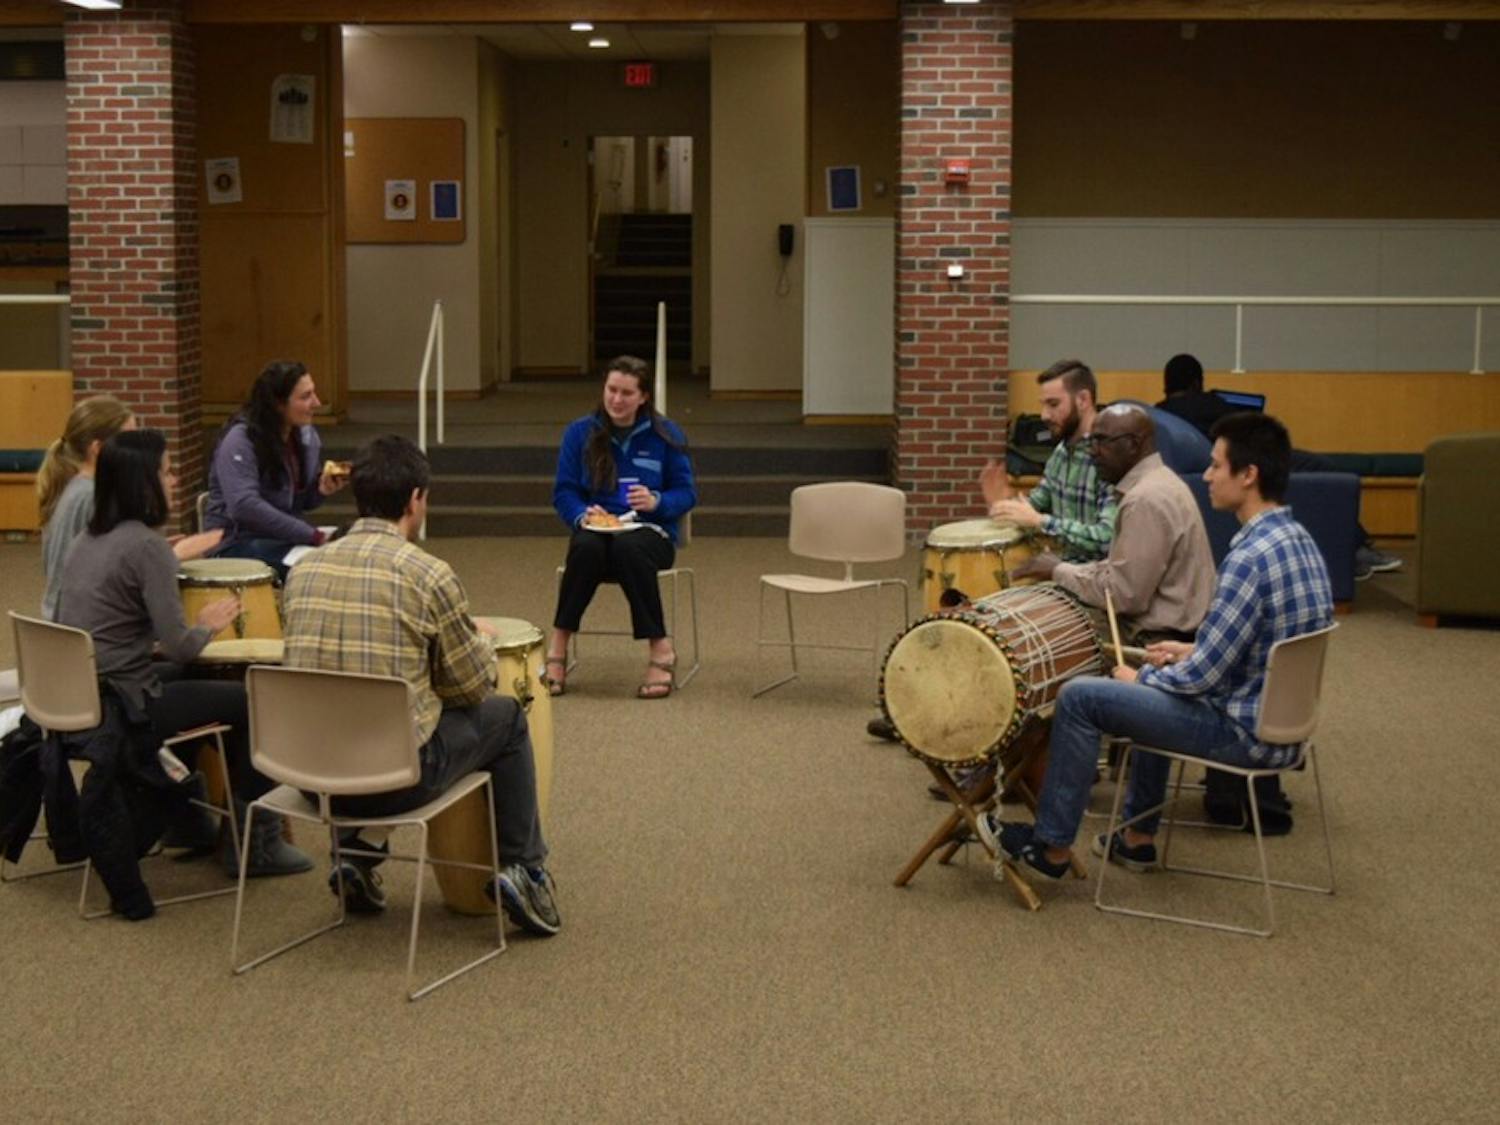 The World Music Percussion Ensemble members hosted a Hands-On Percussion Study Break in Brace Commons on Monday evening.